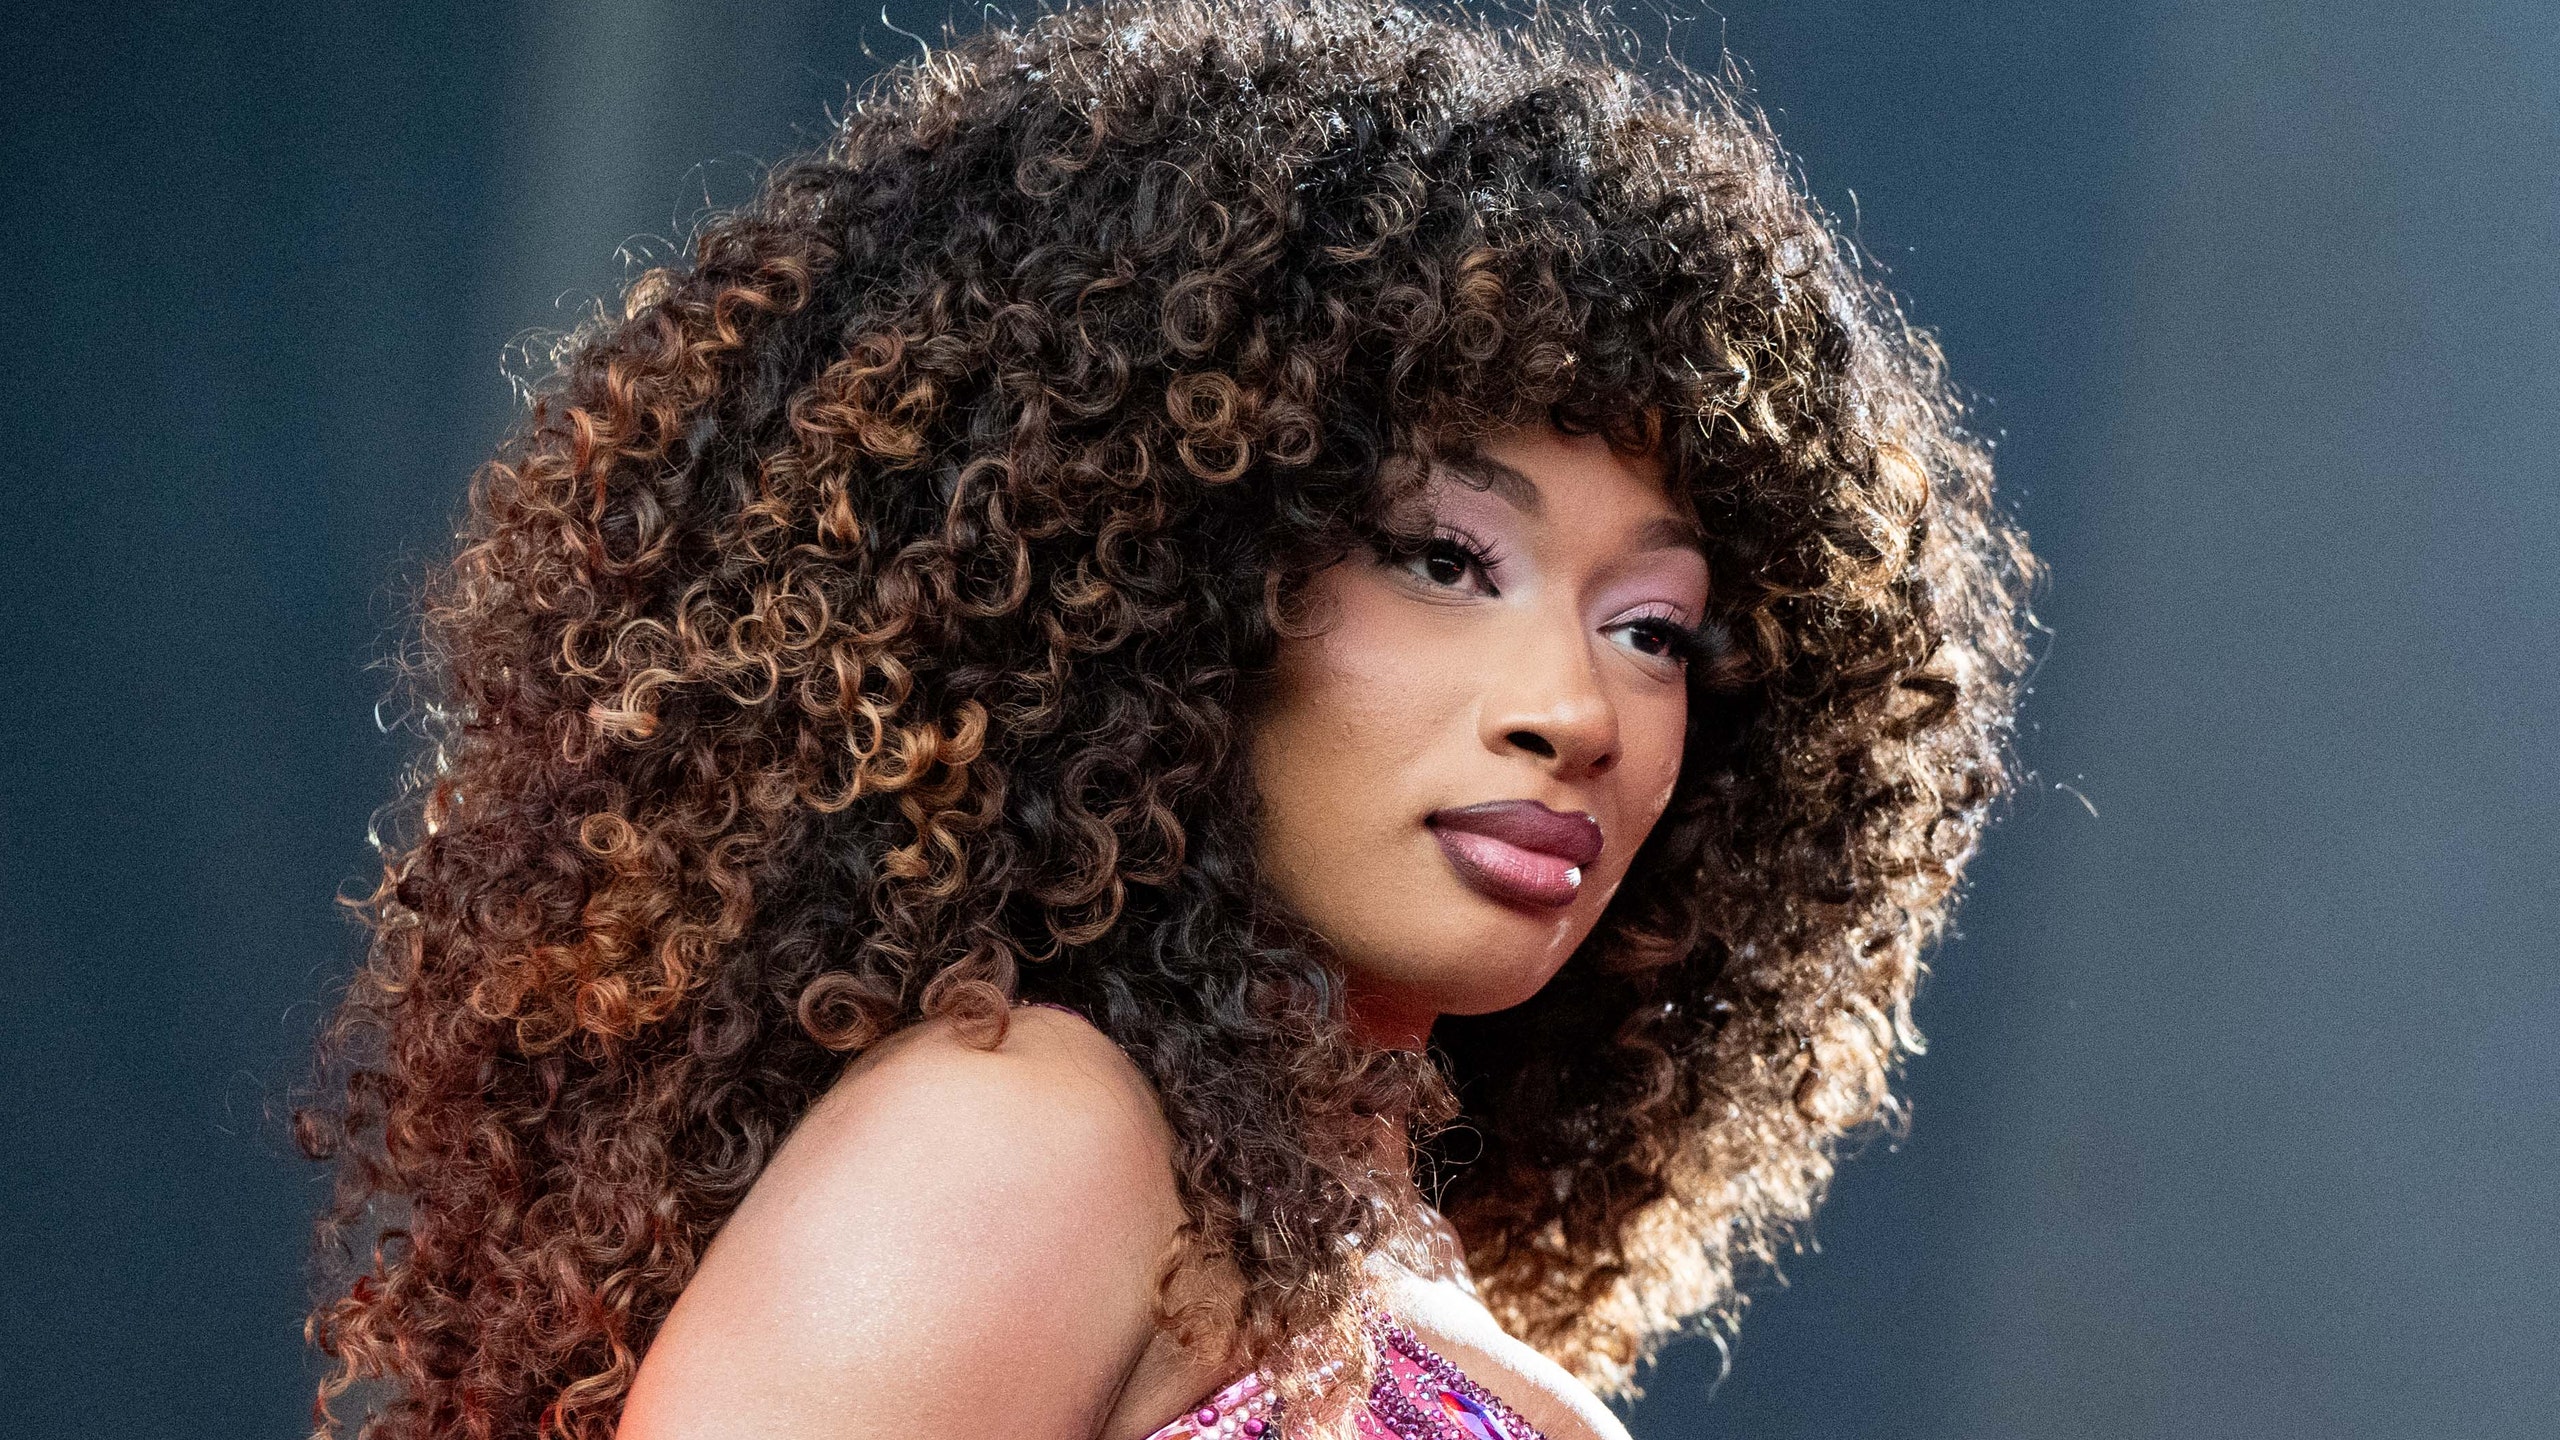 Megan Thee Stallion performs onstage wearing a purple outfit and big curls.